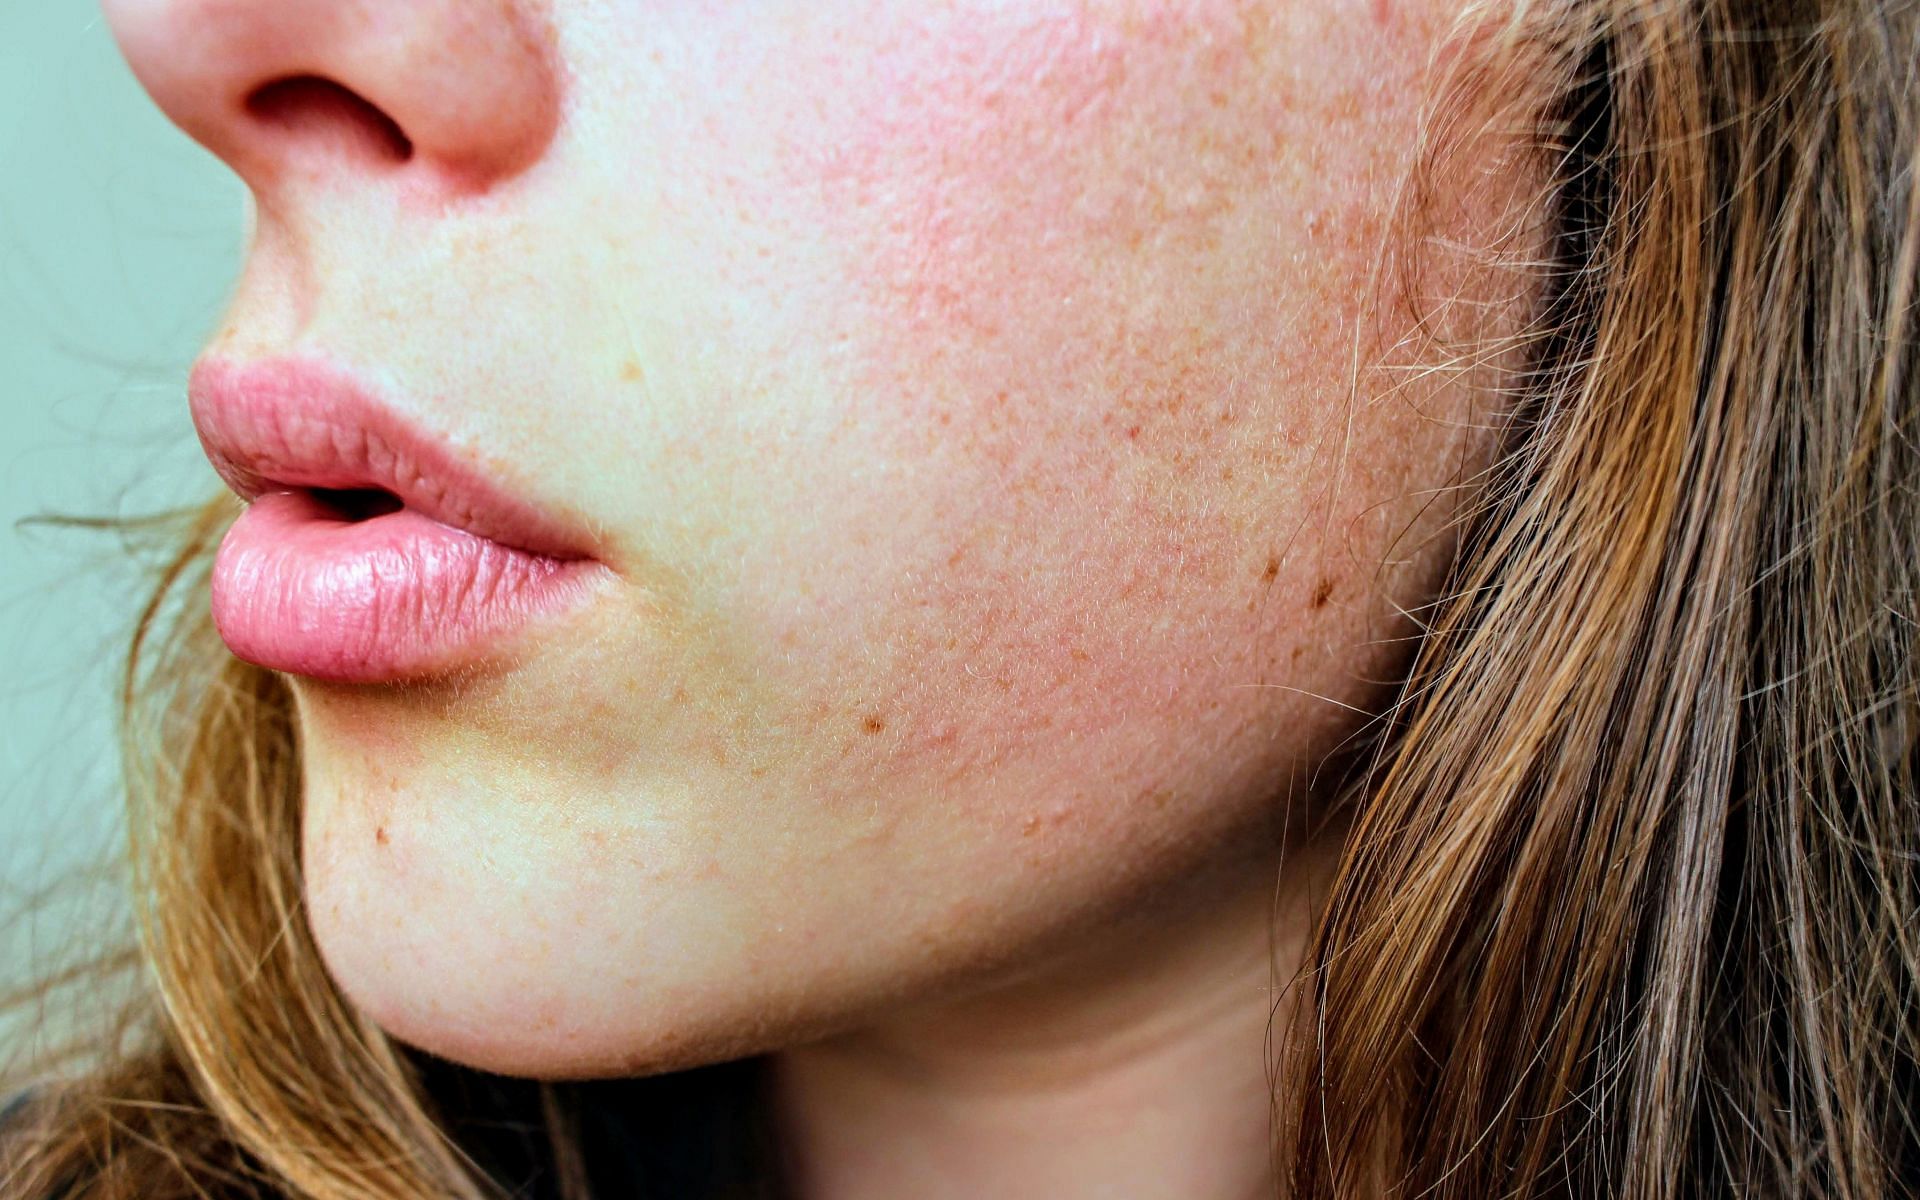 Disadvantages of using the the new trend on acne prone skin (image sourced via Pexels / Photo by Jenna Hamra)